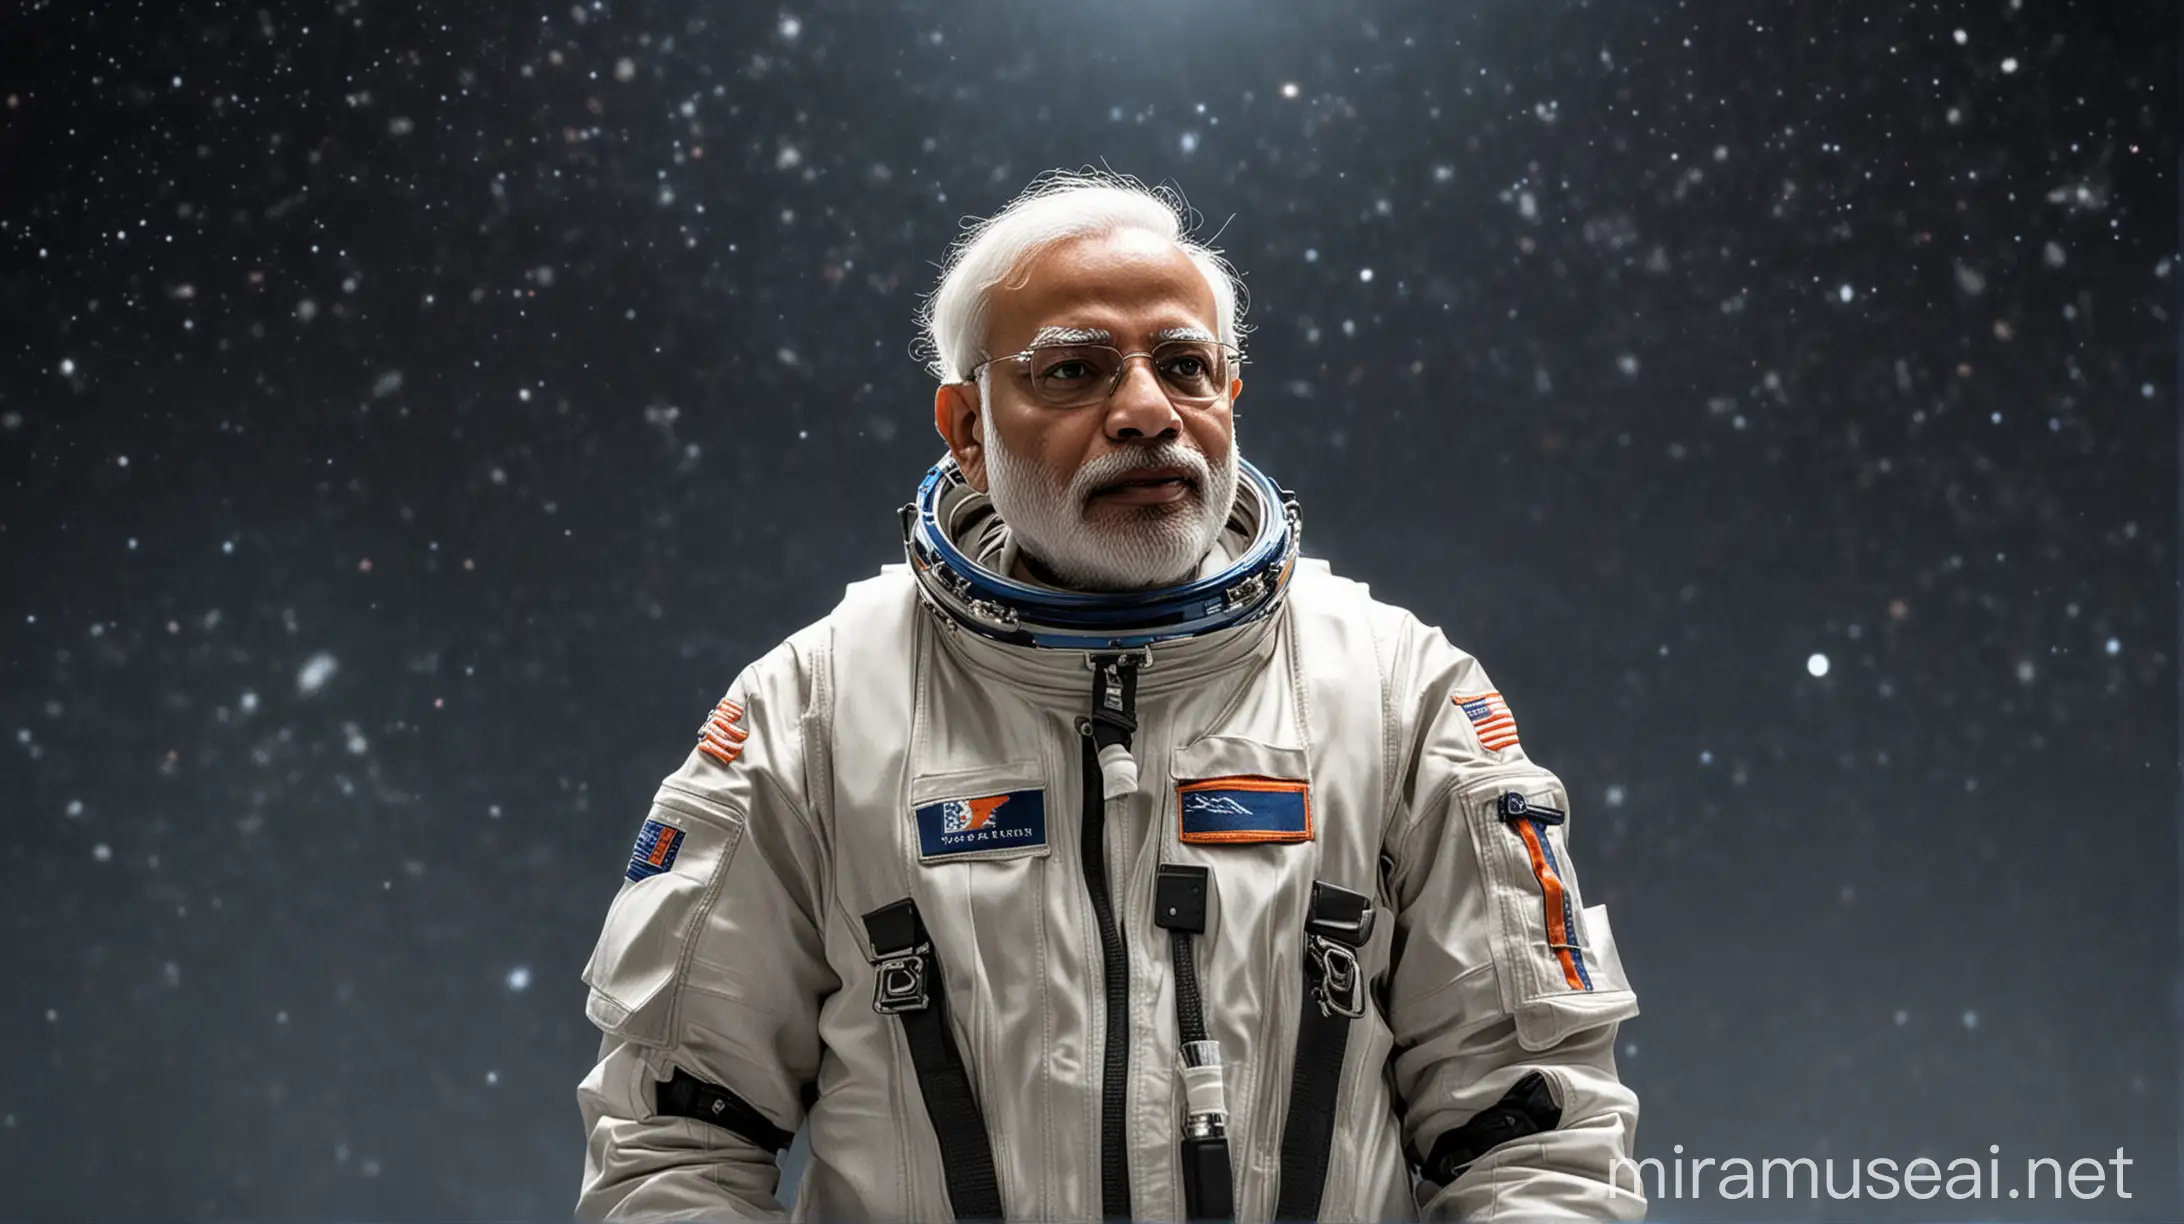 Indian prime Minister Narendra Modi as Scientist, Wearing space suit
